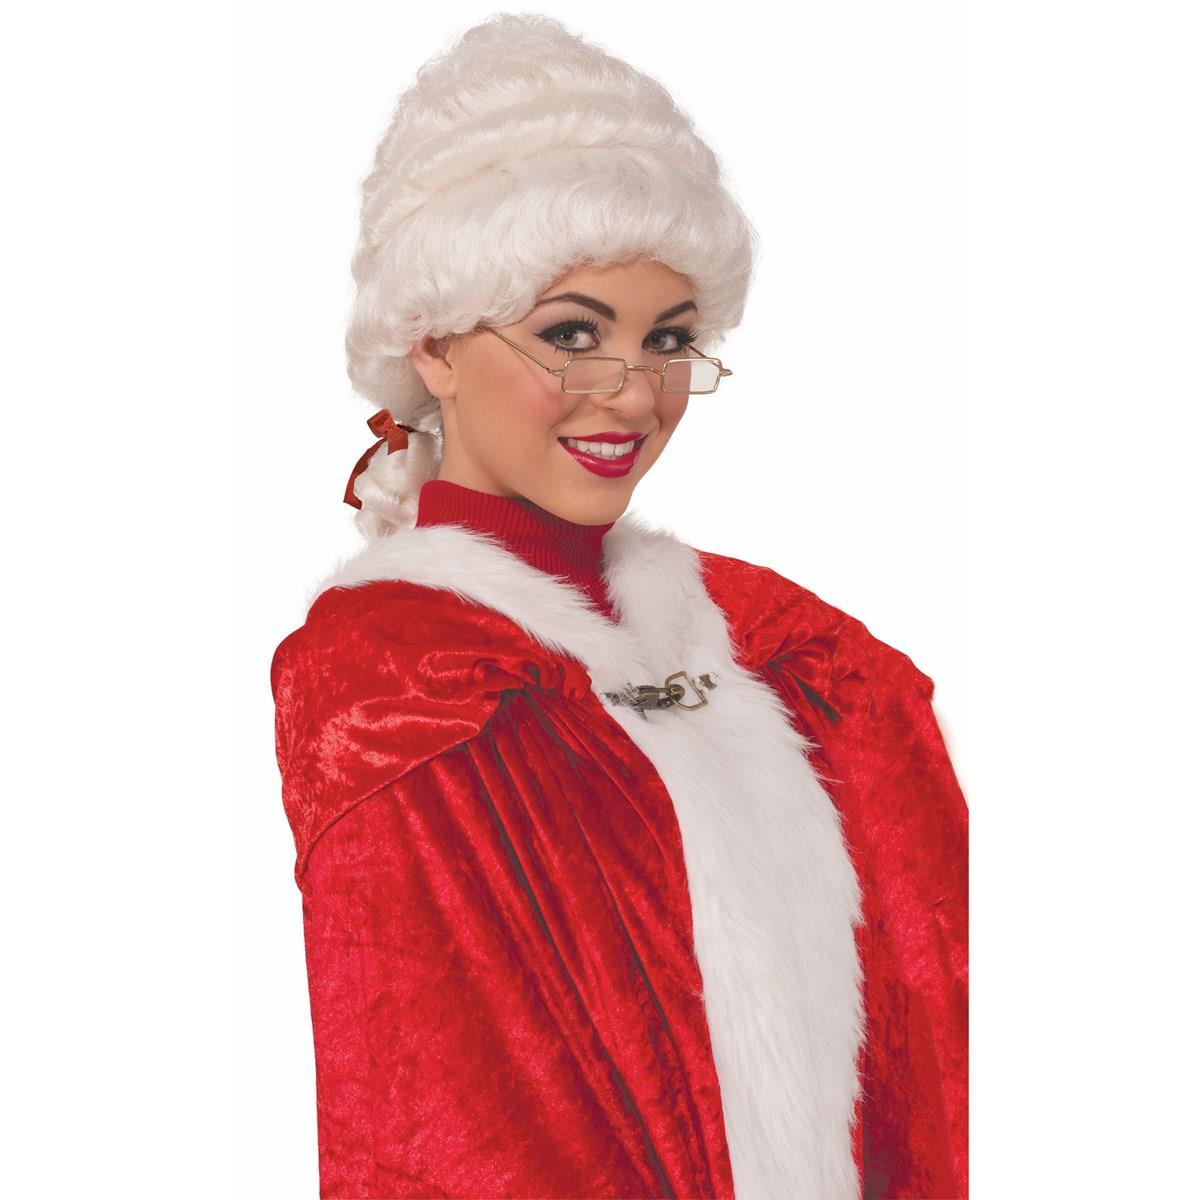 275409 Mrs. Claus Deluxe Adult Wig